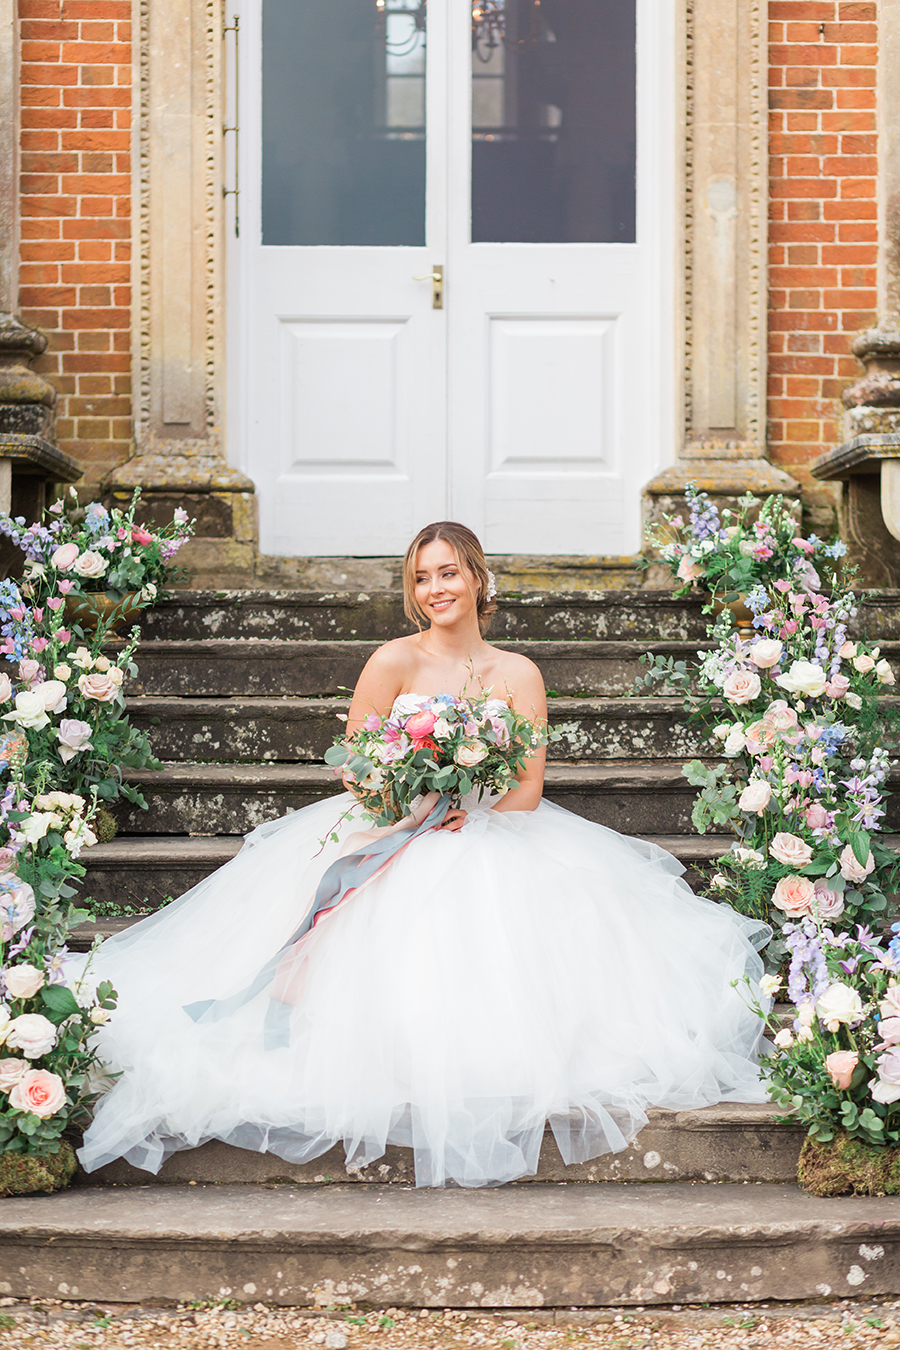 Country Dreams”-A Baroque Inspired, modern romantic English Country wedding shoot with soft pinks and powder blues infused with antique gold. (38)